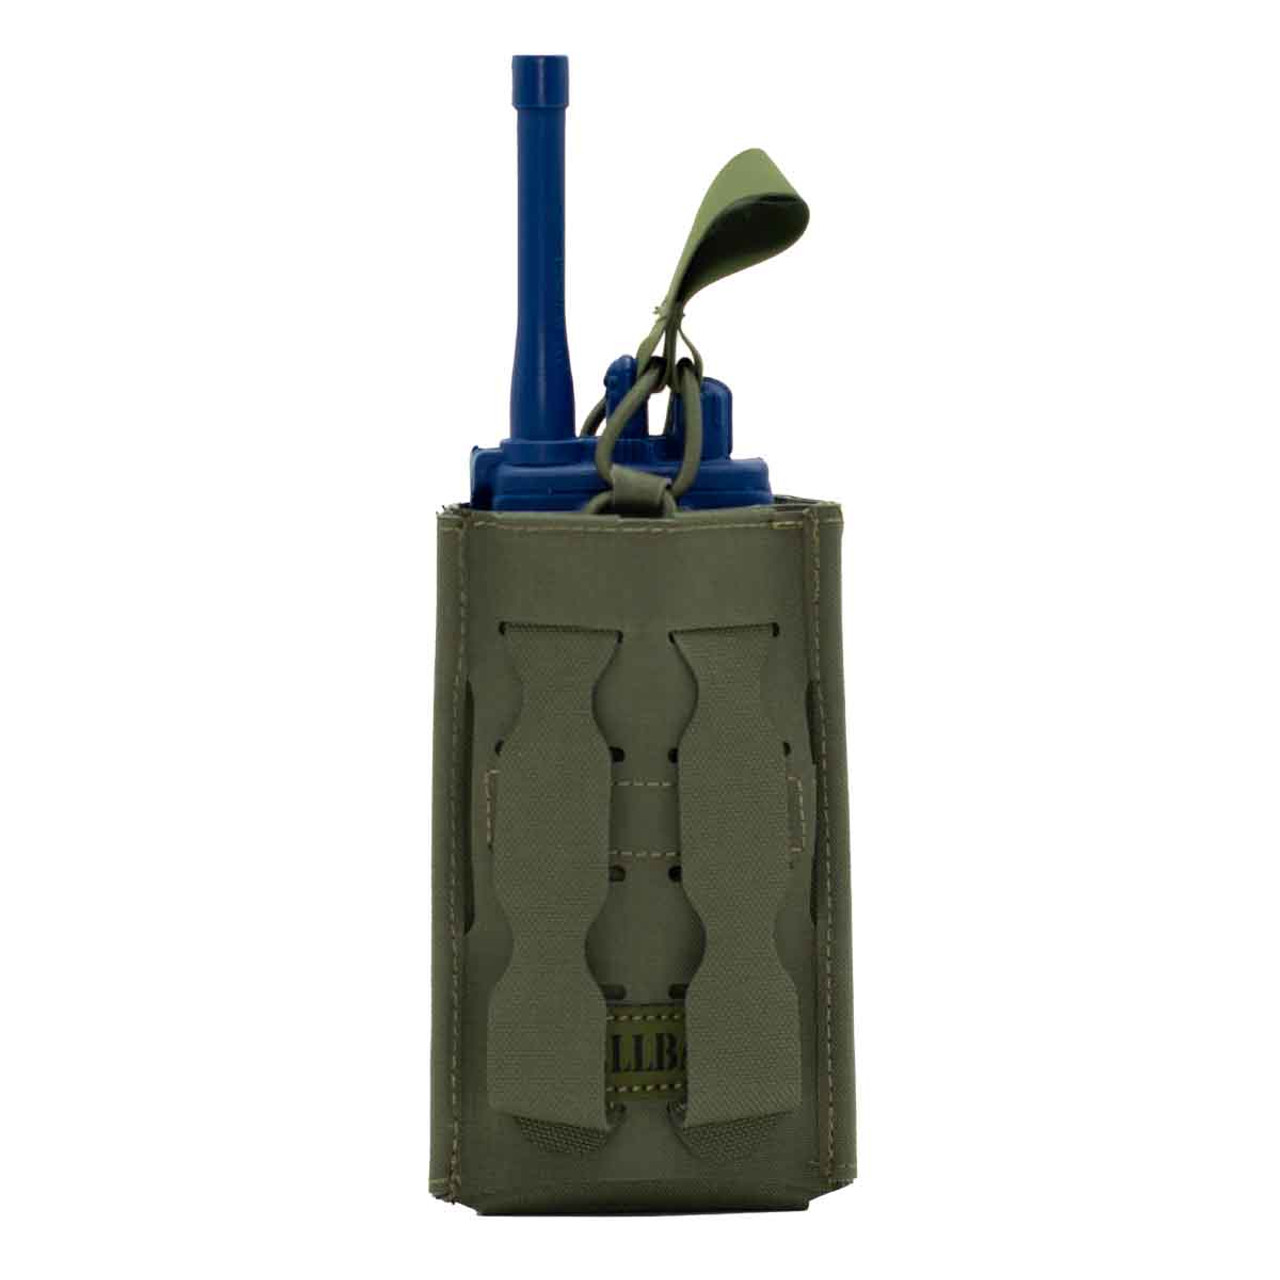 Shellback Tactical Radio Pouch